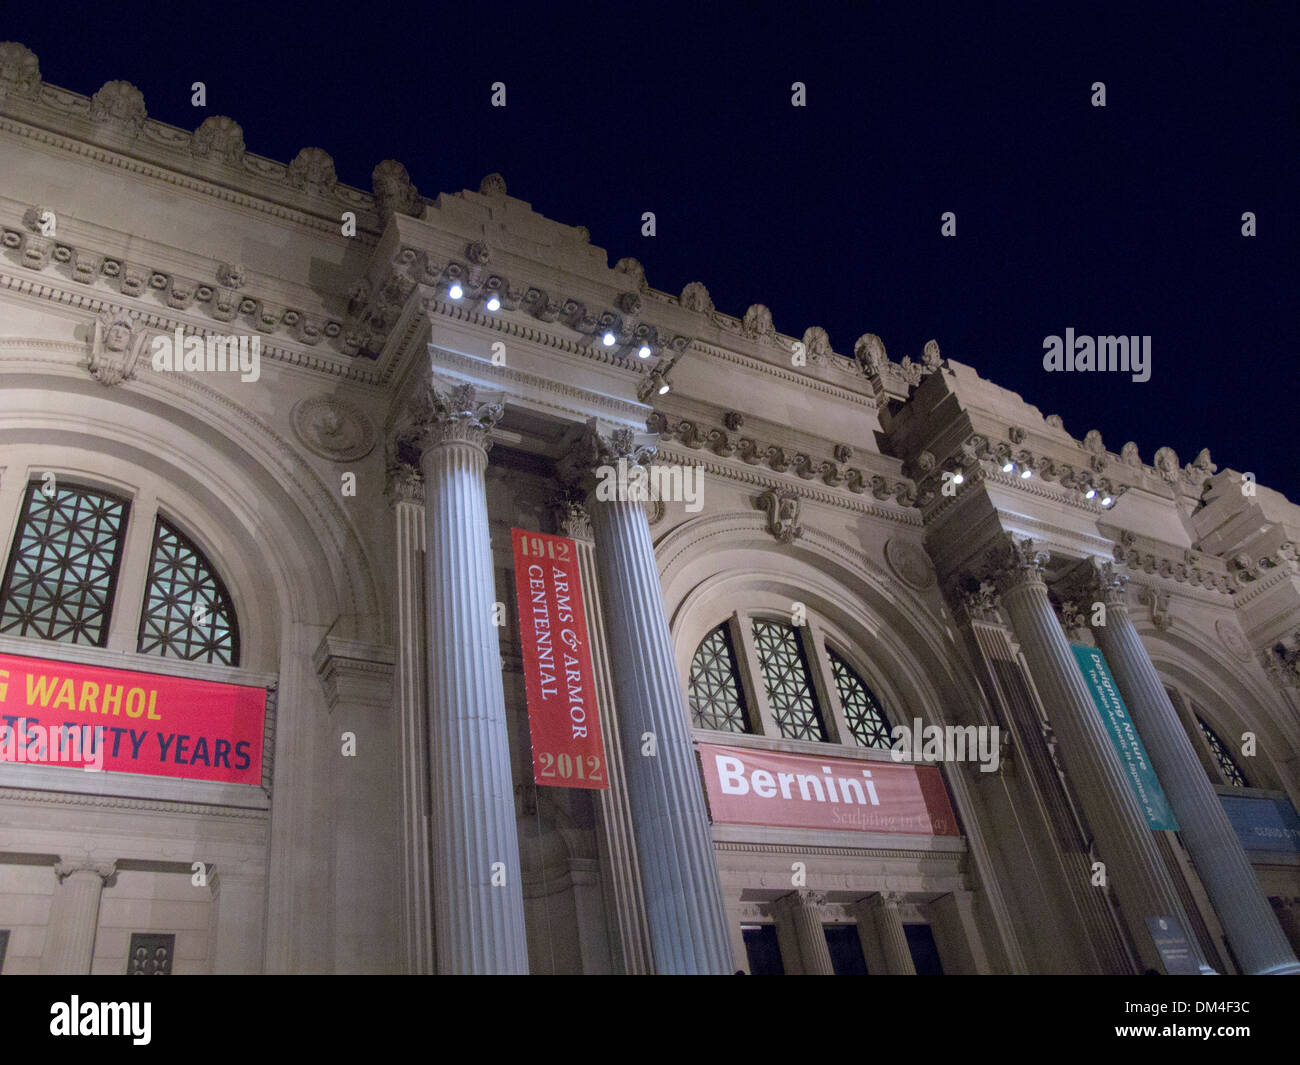 A night view of the Metropolitan Museum of Art on Fifth Avenue in New York City, USA. A Bernini banner adorns the entrance. Stock Photo